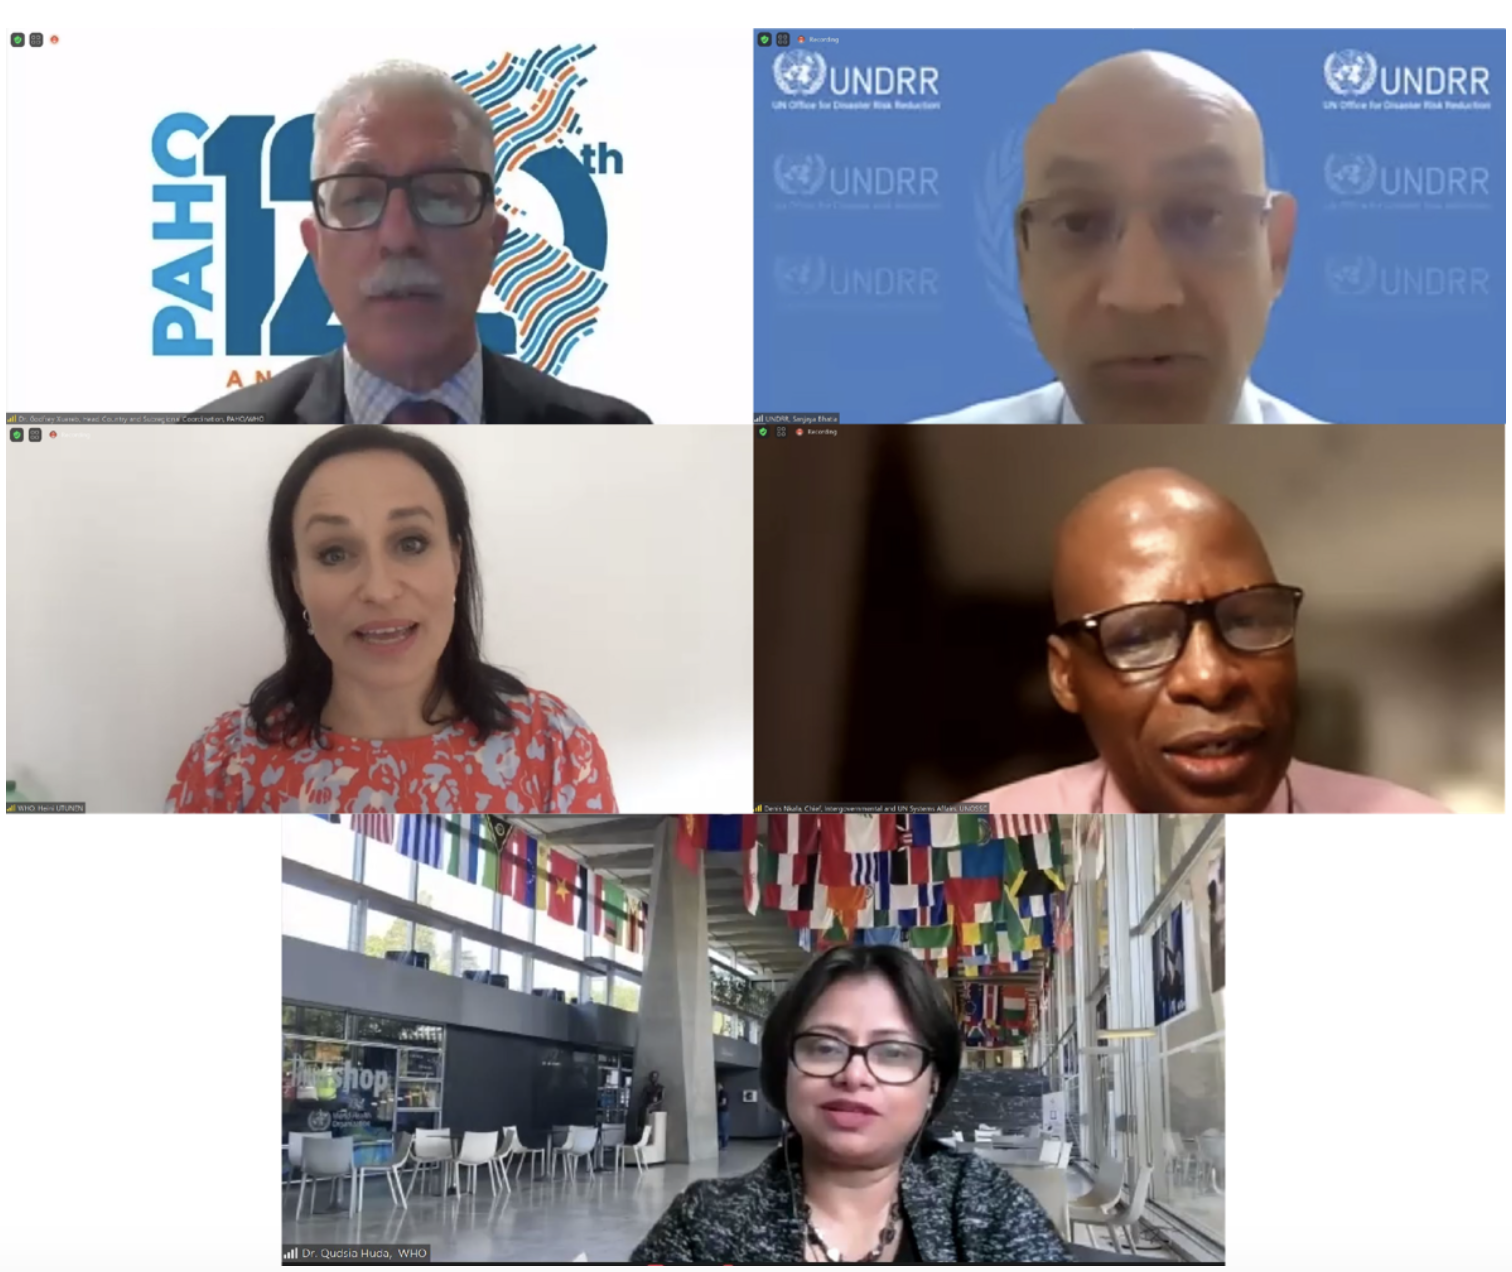 Top-left to bottom-right: Dr. Godfrey Xuereb, Head of Country and Subregional Coordination, PAHO/WHO; Sanjaya Bhatia, Head of Global Education and Training Institute, UNDRR, Heini Utunen, Head a.i. of Learning and Capacity Development Unit, WHO Health Emergencies Programme; Denis Nkala, Chief of Inter-governmental and UN Affairs, UNOSSC), and Dr. Qudsia Huda (Head of Disaster Risk Management and Resilience Unit, WHO).